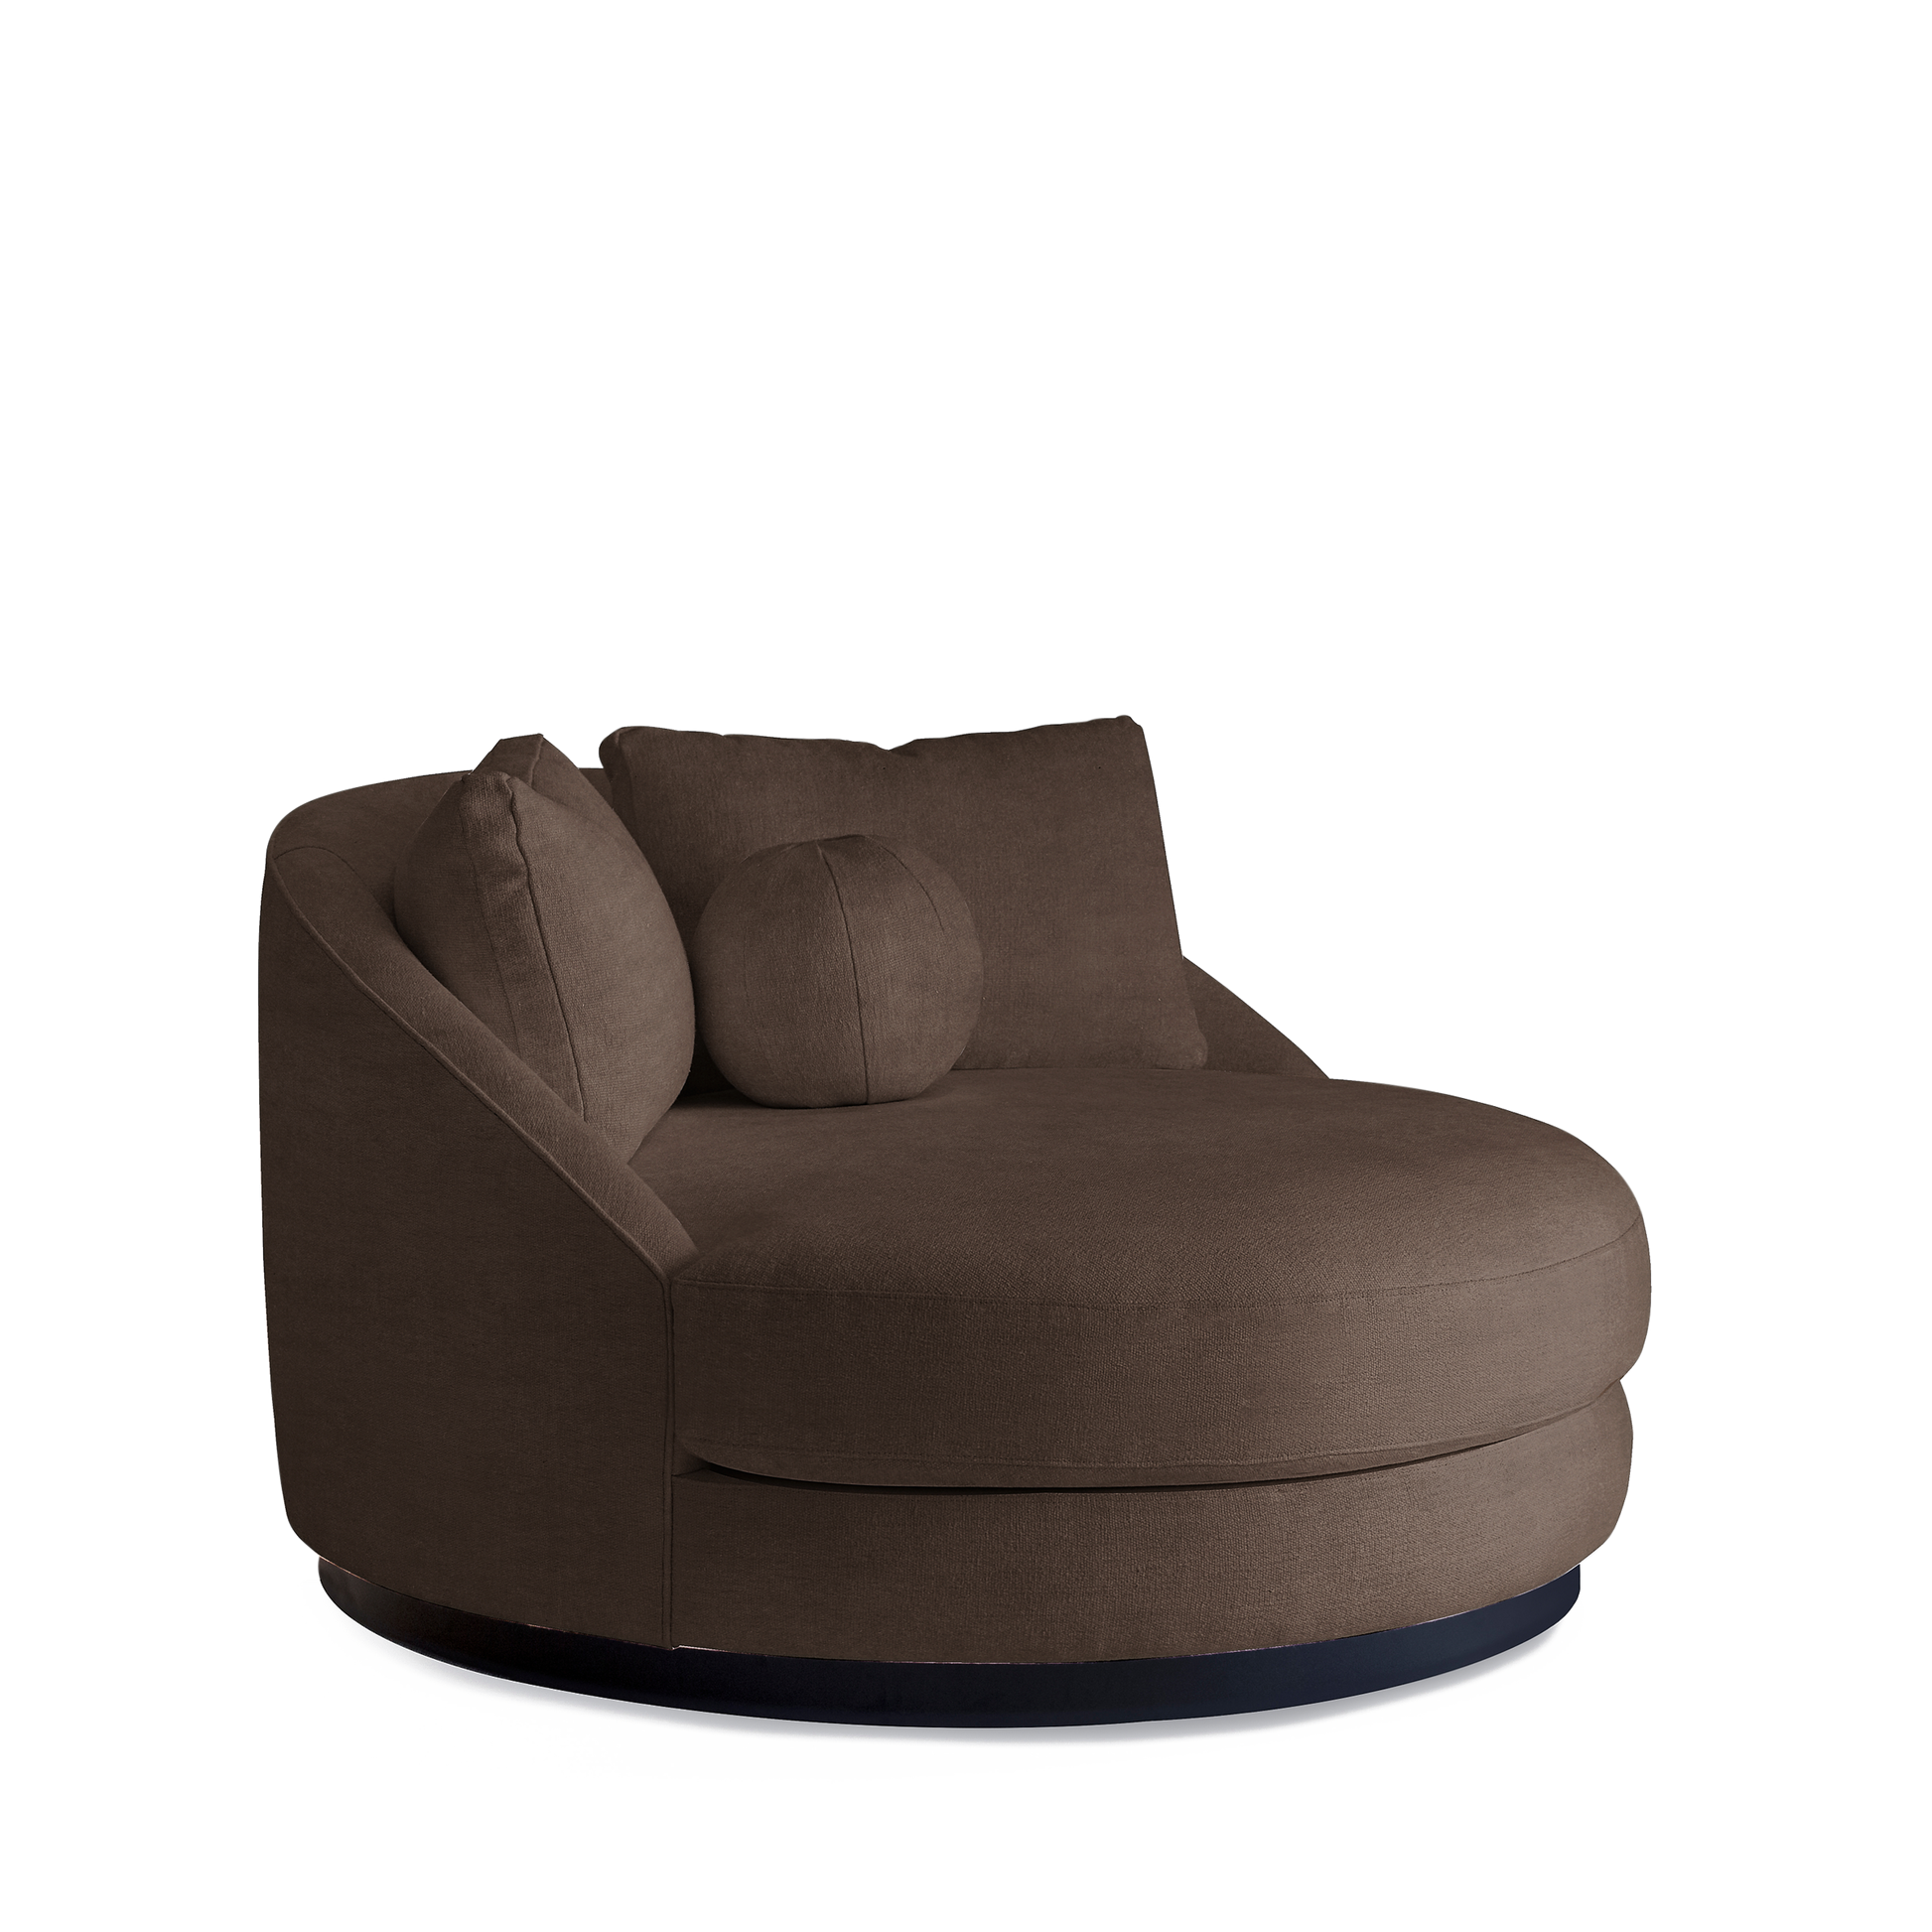 SIESTA Lounge Bed with brown suede textile 